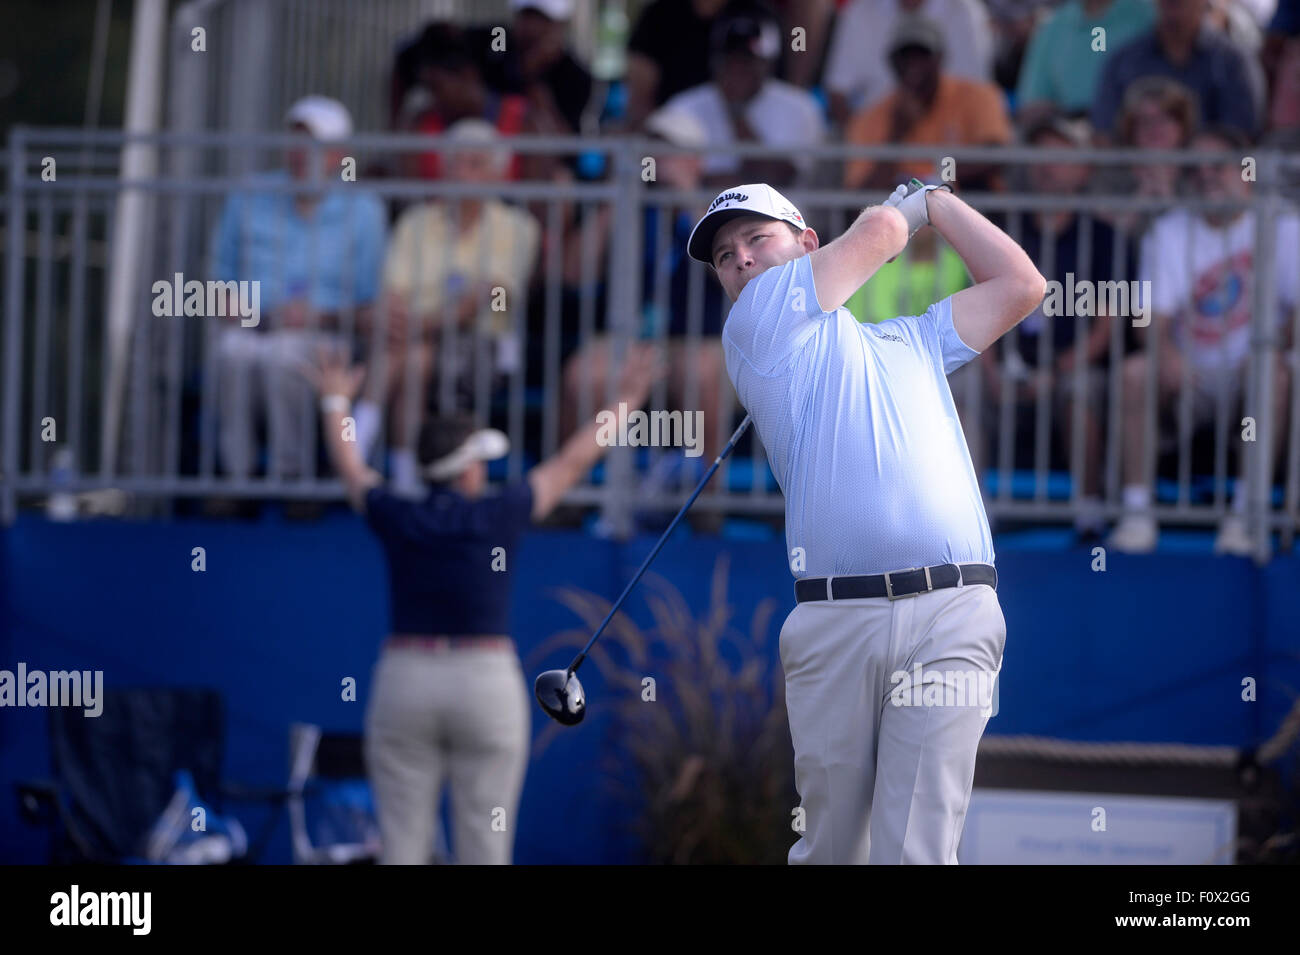 Greensboro, NC, USA. 22nd Aug, 2015. Branden Grace tees off on hole 1 during the third round of the 2015 Wyndham Championship at Sedgefield Country Club in Greensboro, NC. PJ Ward-Brown/CSM/Alamy Live News Stock Photo